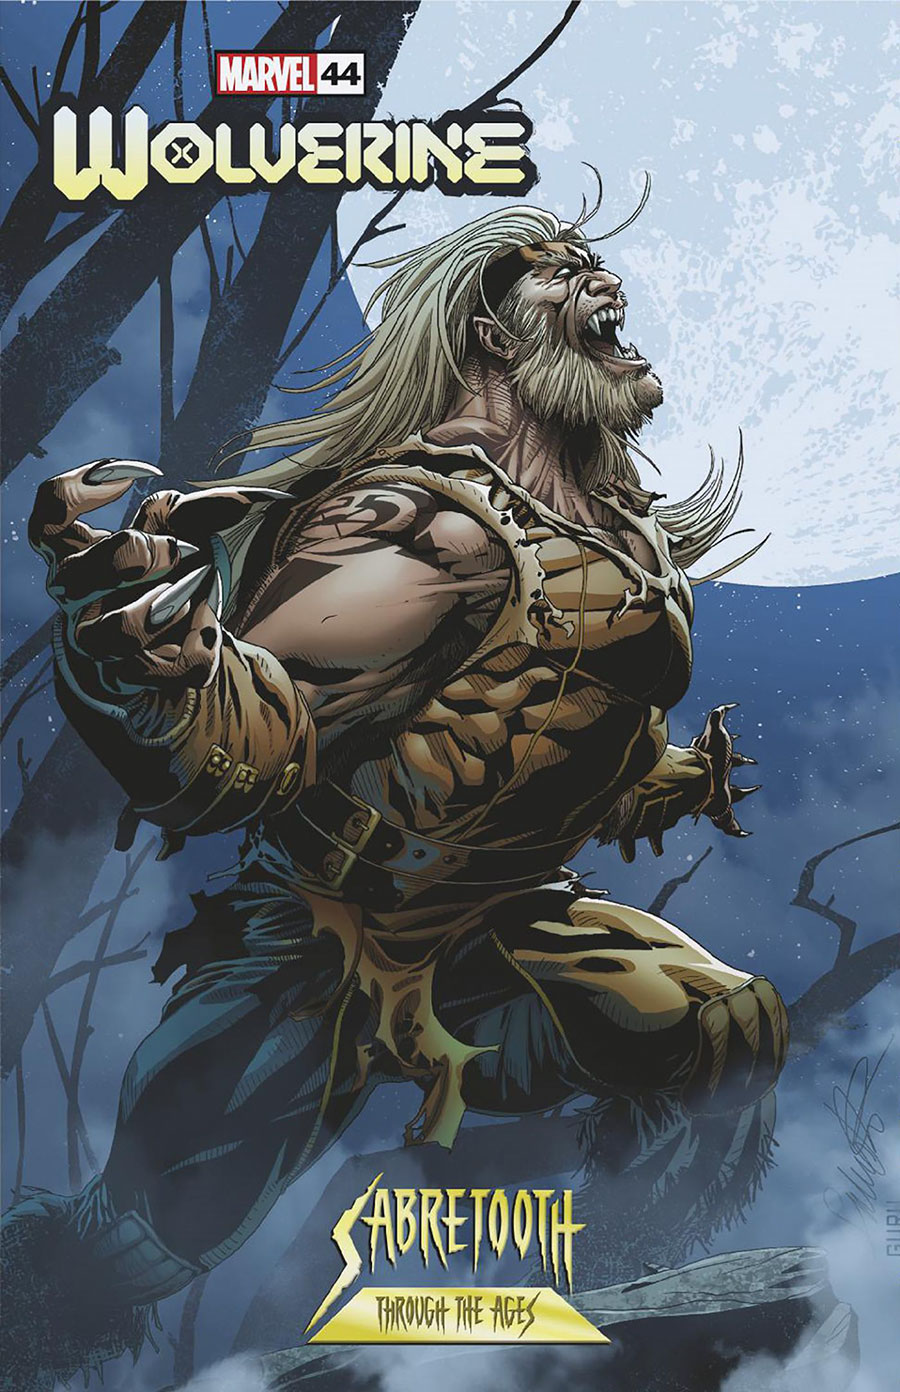 Wolverine Vol 7 #44 Cover B Variant Salvador Larroca Sabretooth Through The Ages Cover